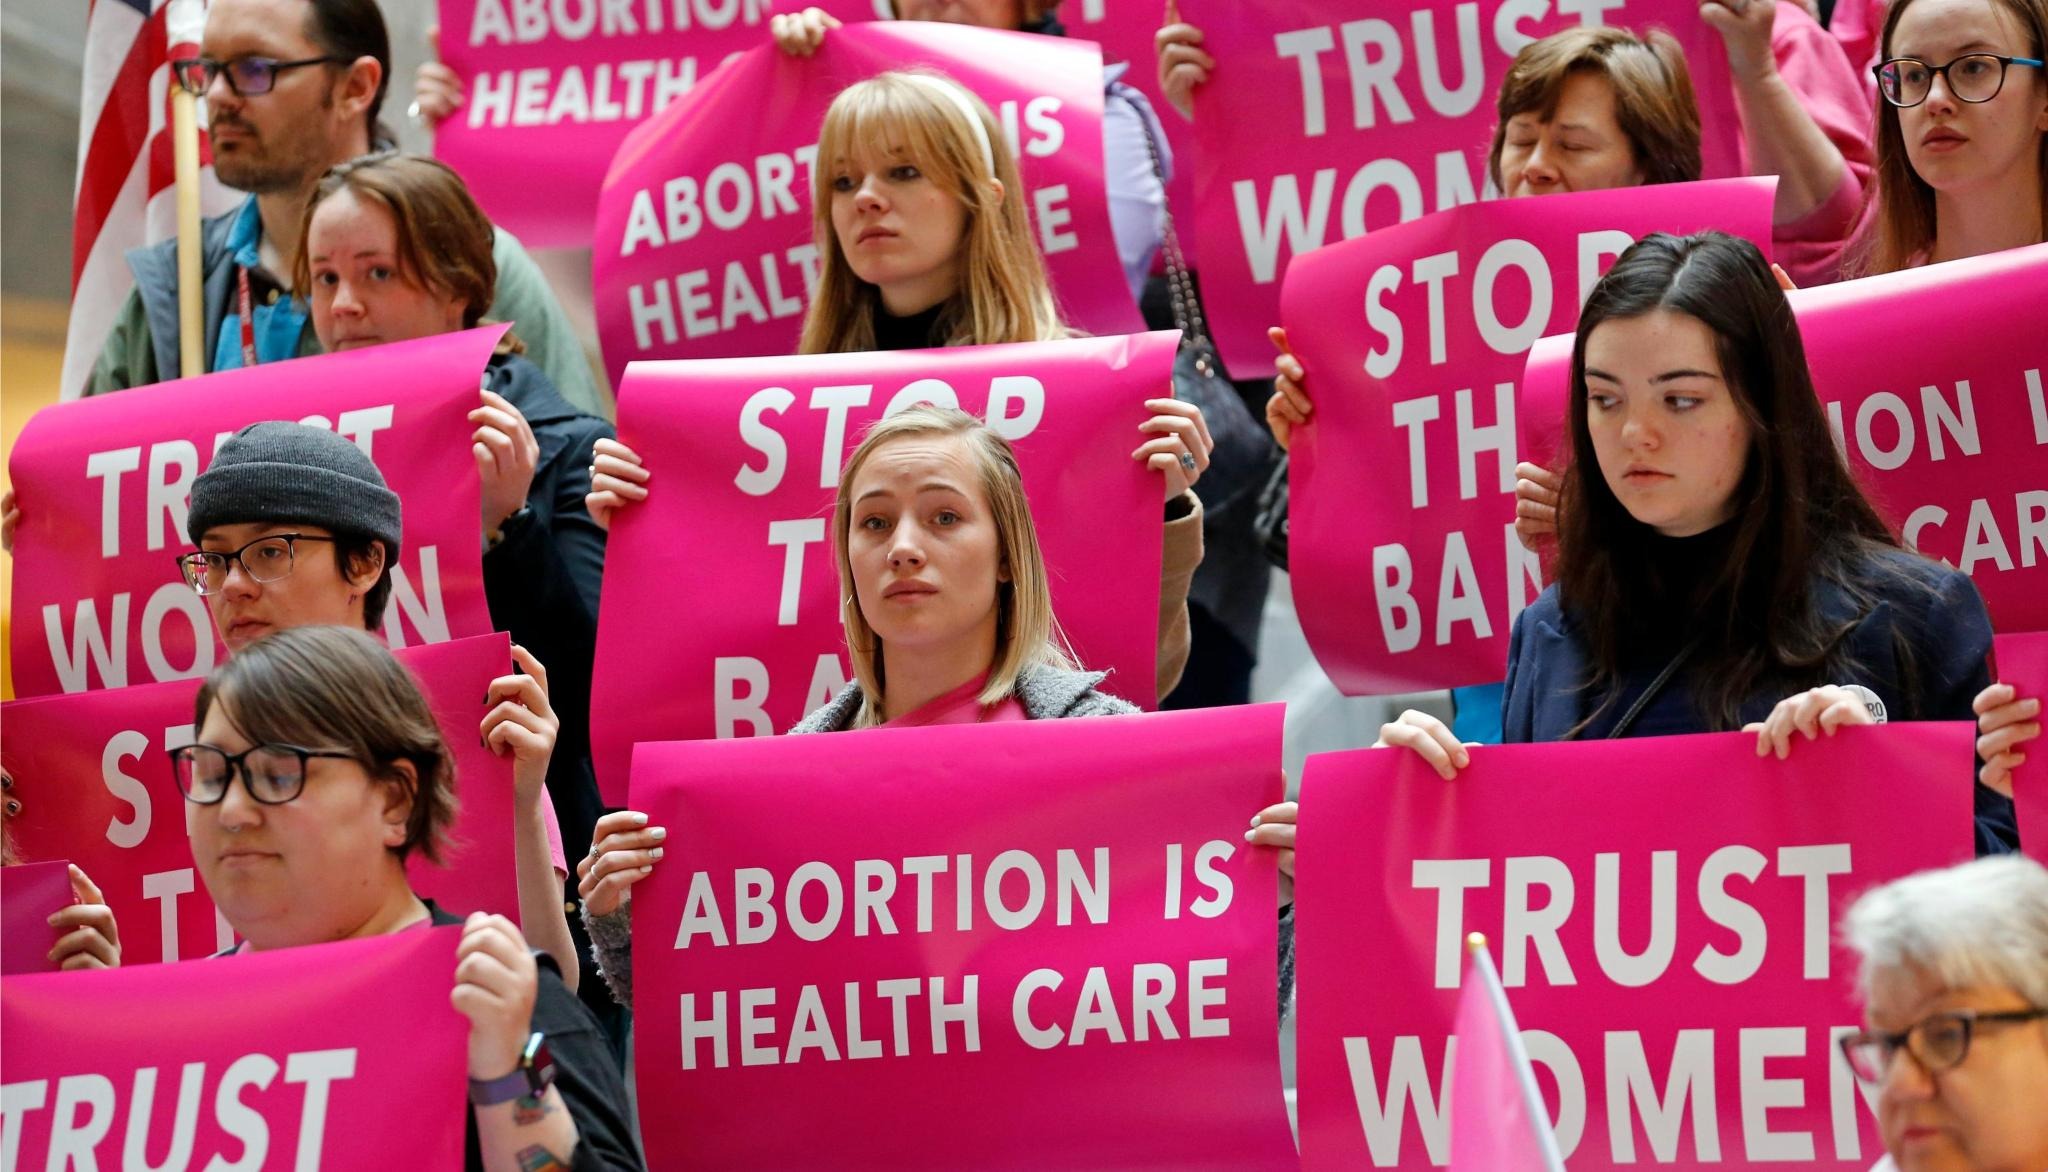 The “Independent” Women Who Oppose Women’s Rights to Make Independent Choices About Abortion